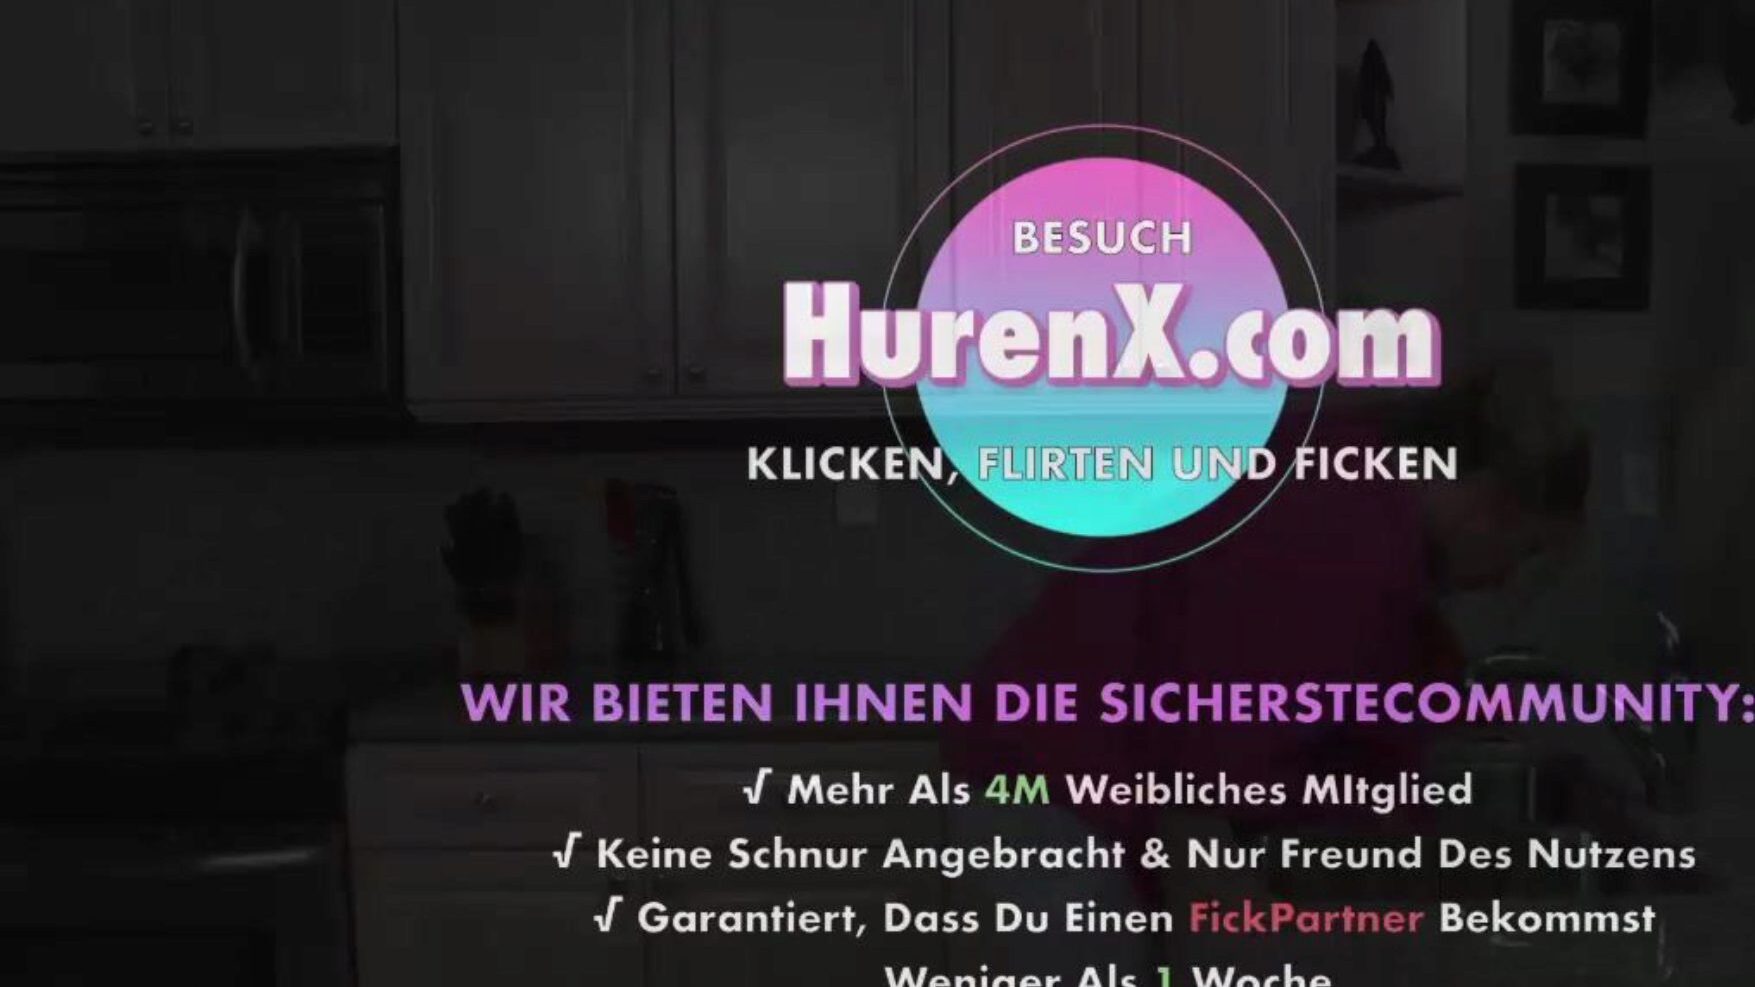 stiefmutter will meine hilfe、free xnxc porn b5：xhamster watch stiefmutter will meine hilfe movie scene on xhamster、the maximum hd fuck-fest tube web site with tos of free German xnxc＆mutter German pornography clip